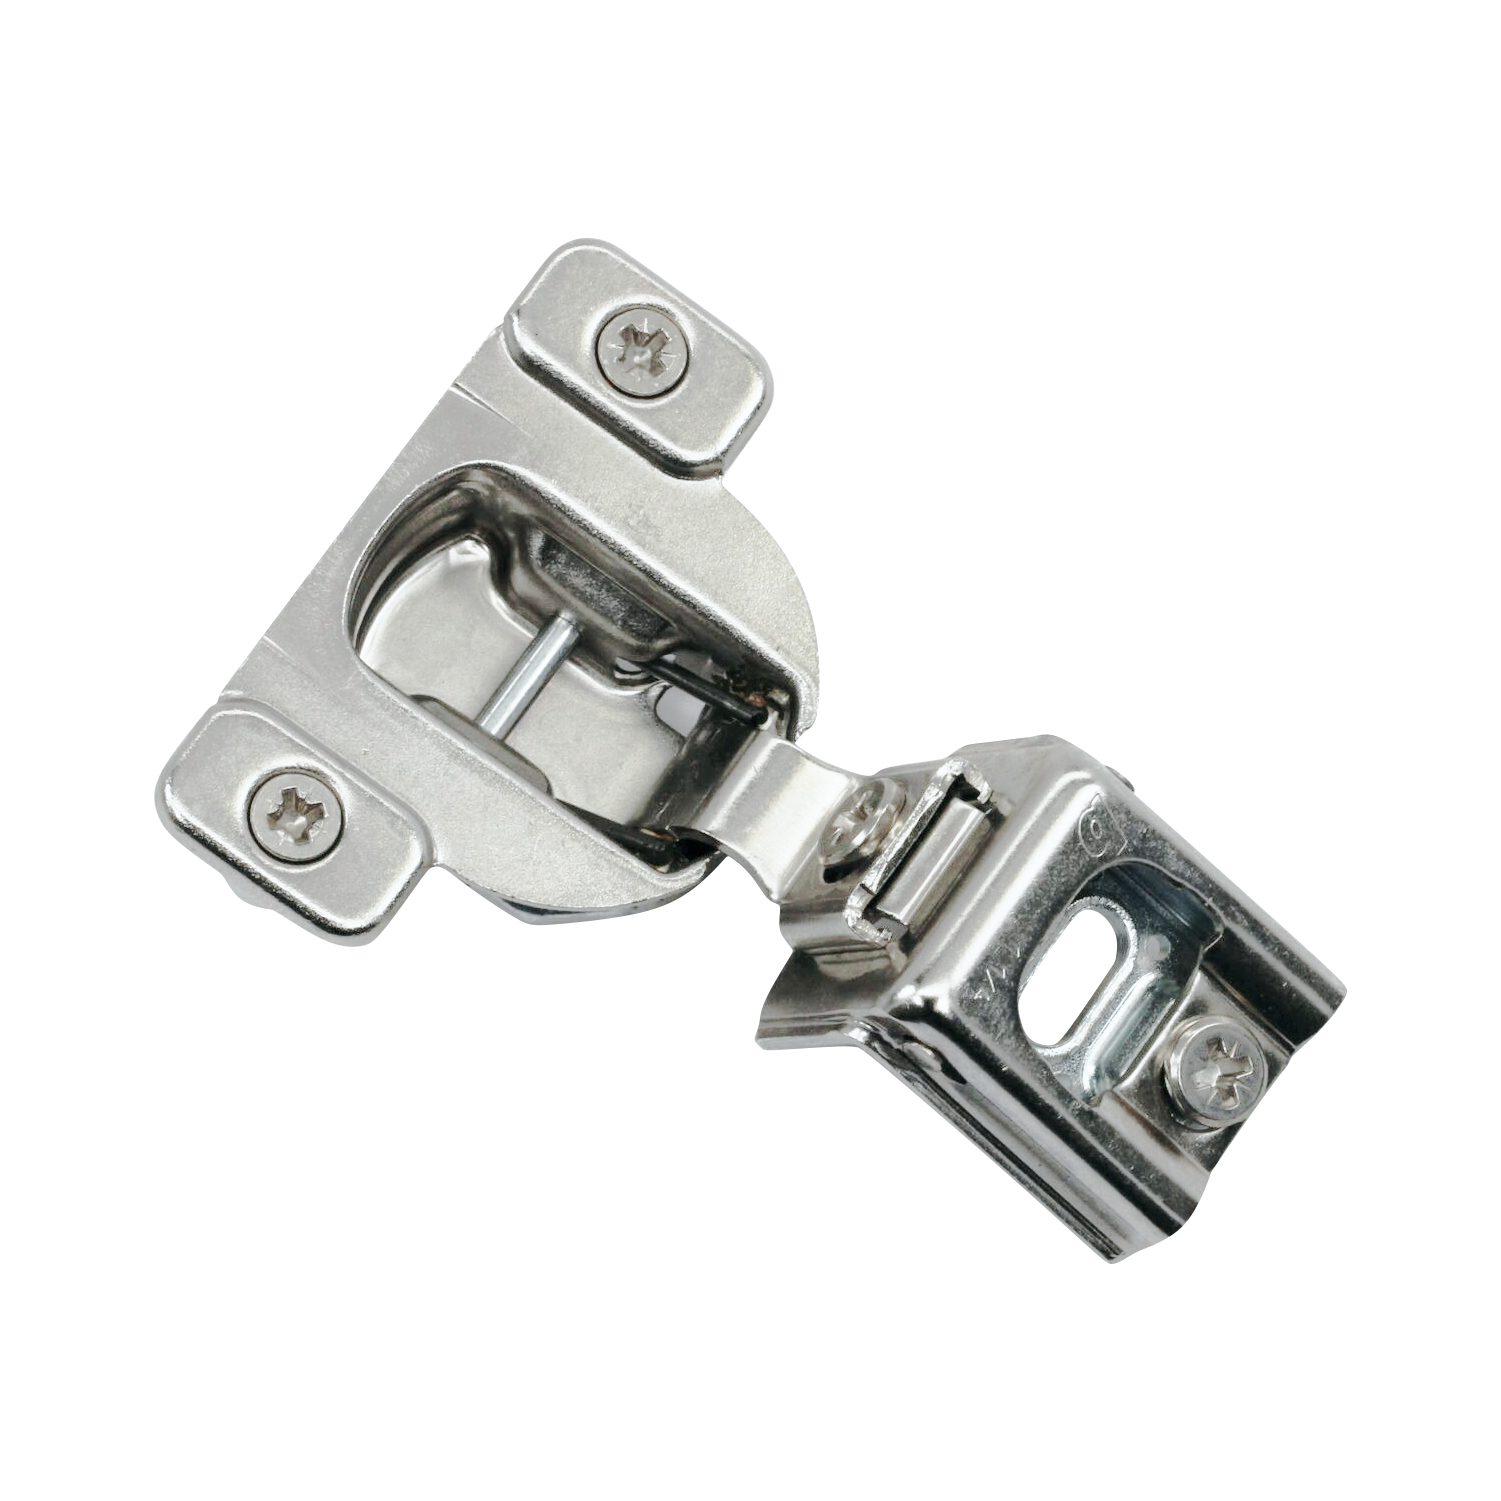 2 Pack 110 Degree Compact 39C Series 1-1/4" Overlay Press-In Self-Closing Cabinet Hinge - image 1 of 7